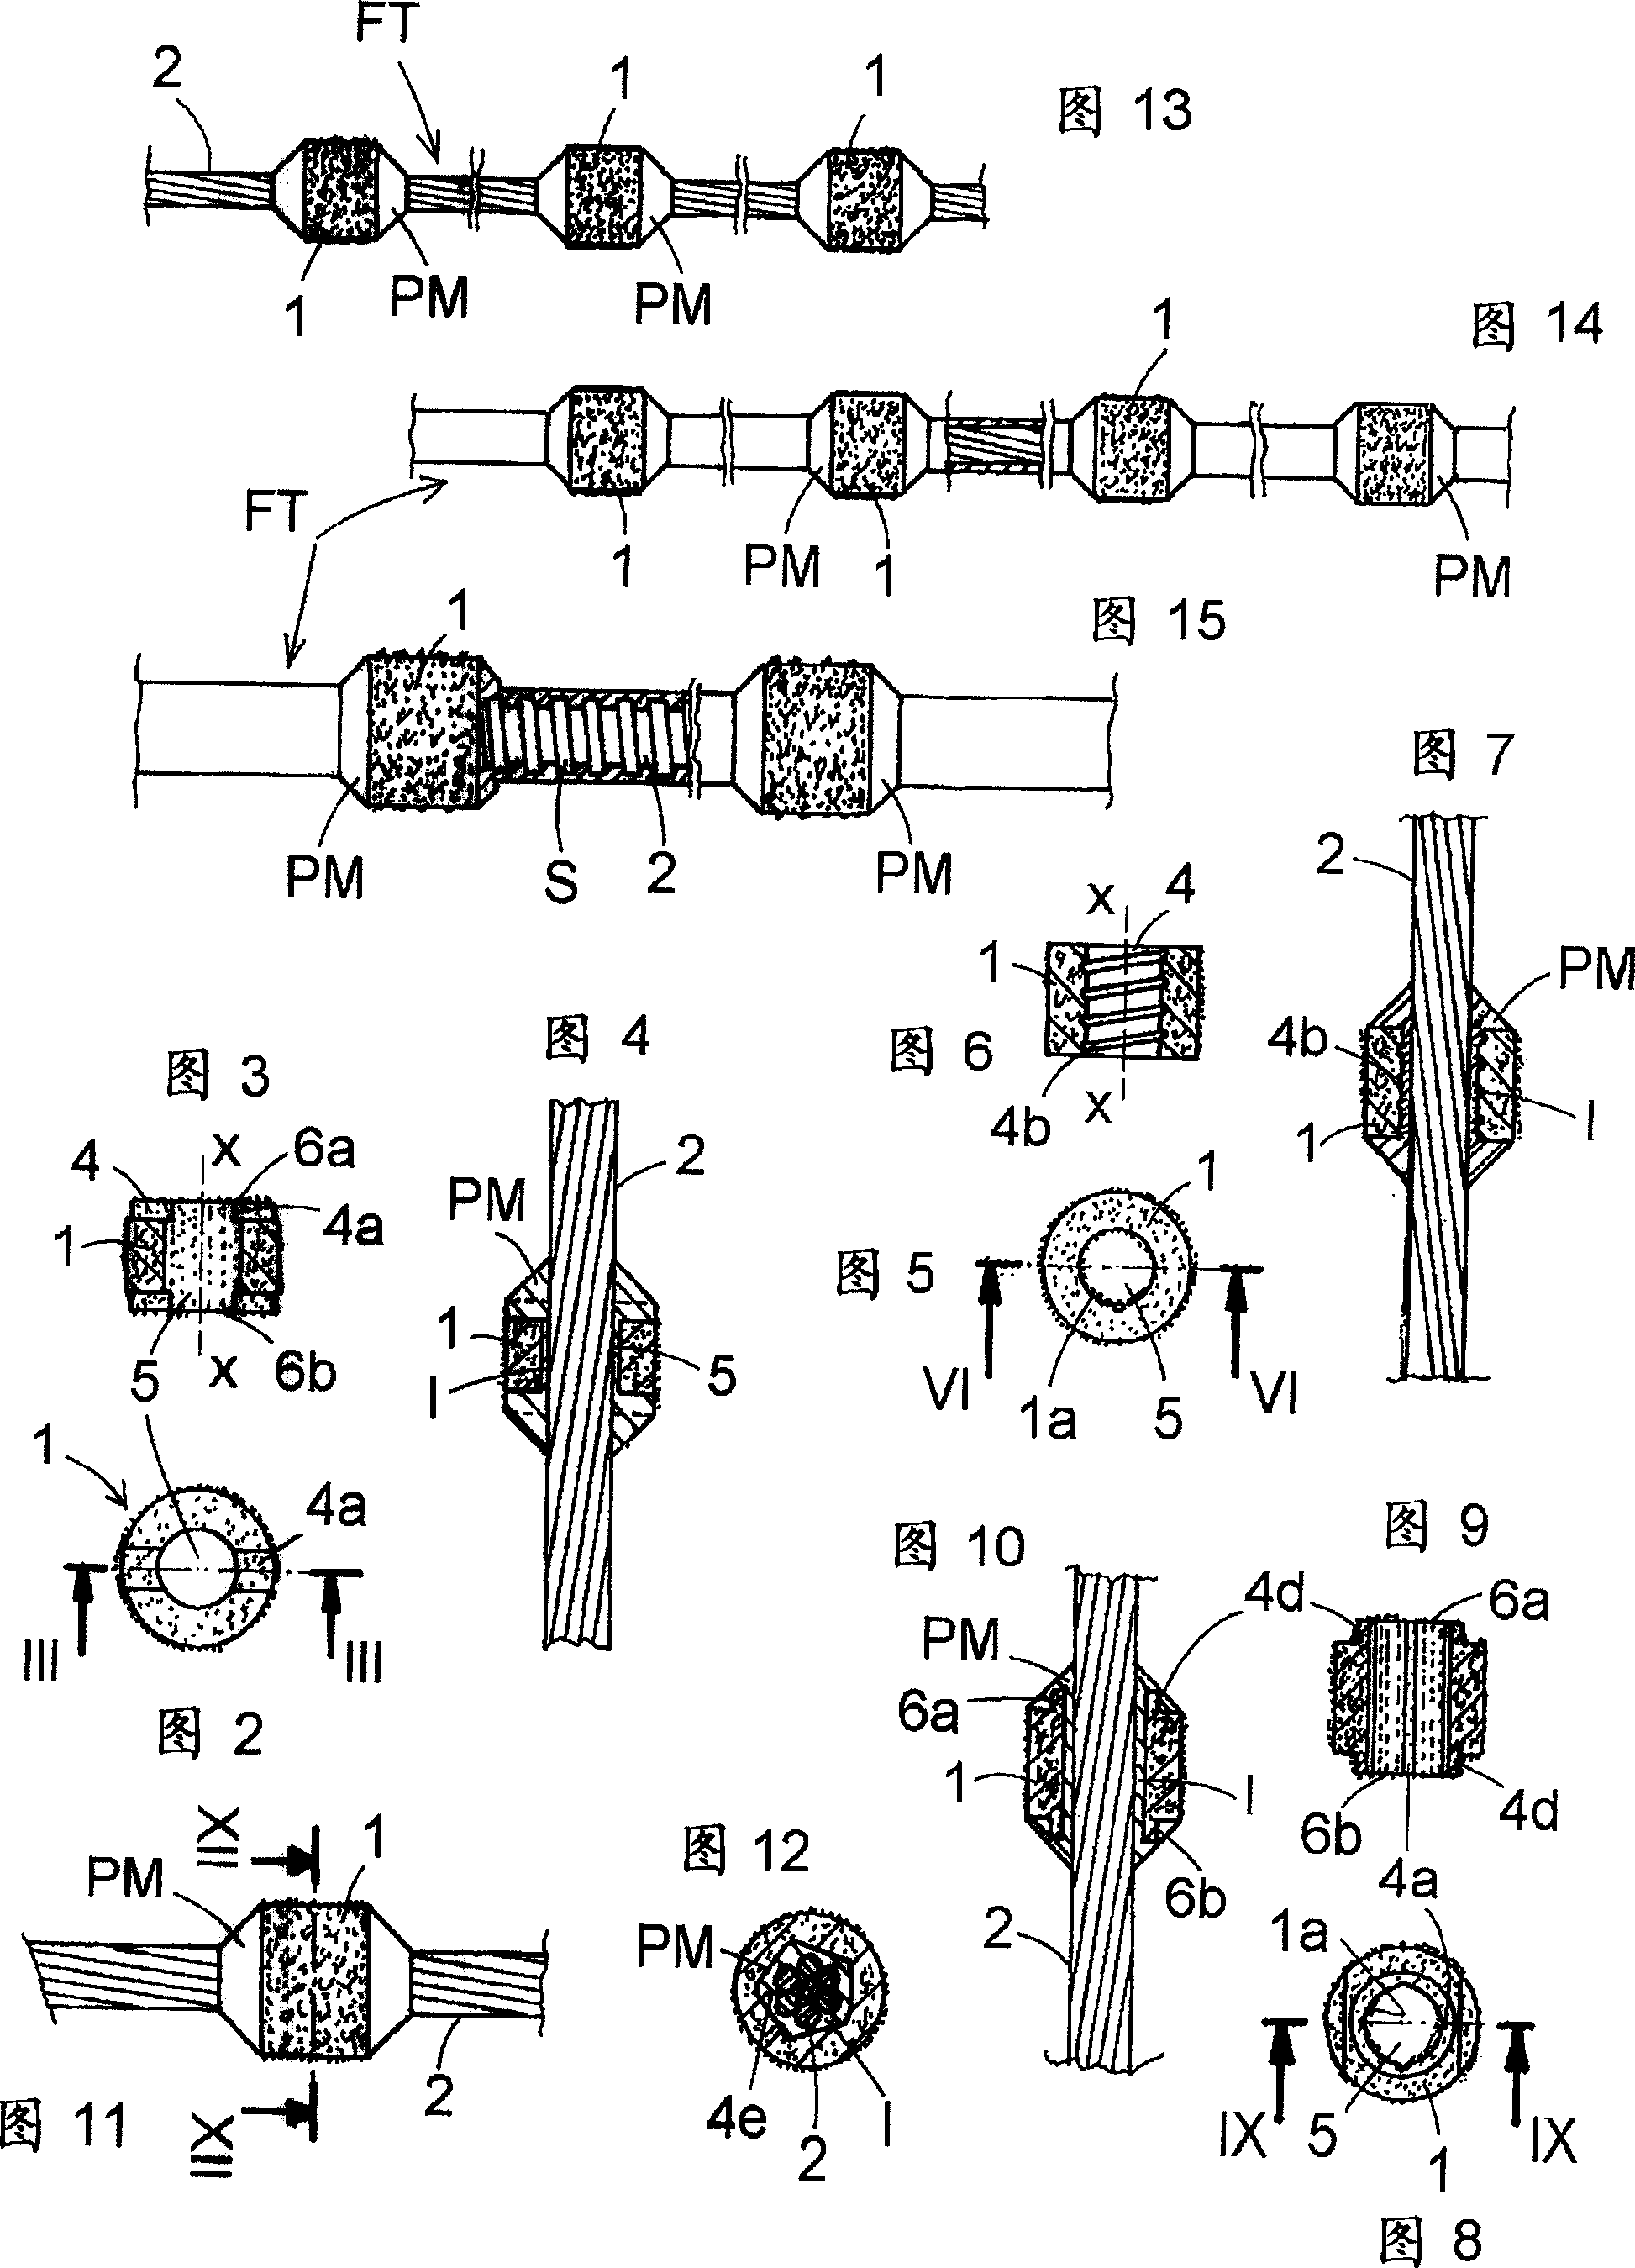 Process for making an annular abrasion bead element for a cutting wire for cutting relatively hard materials